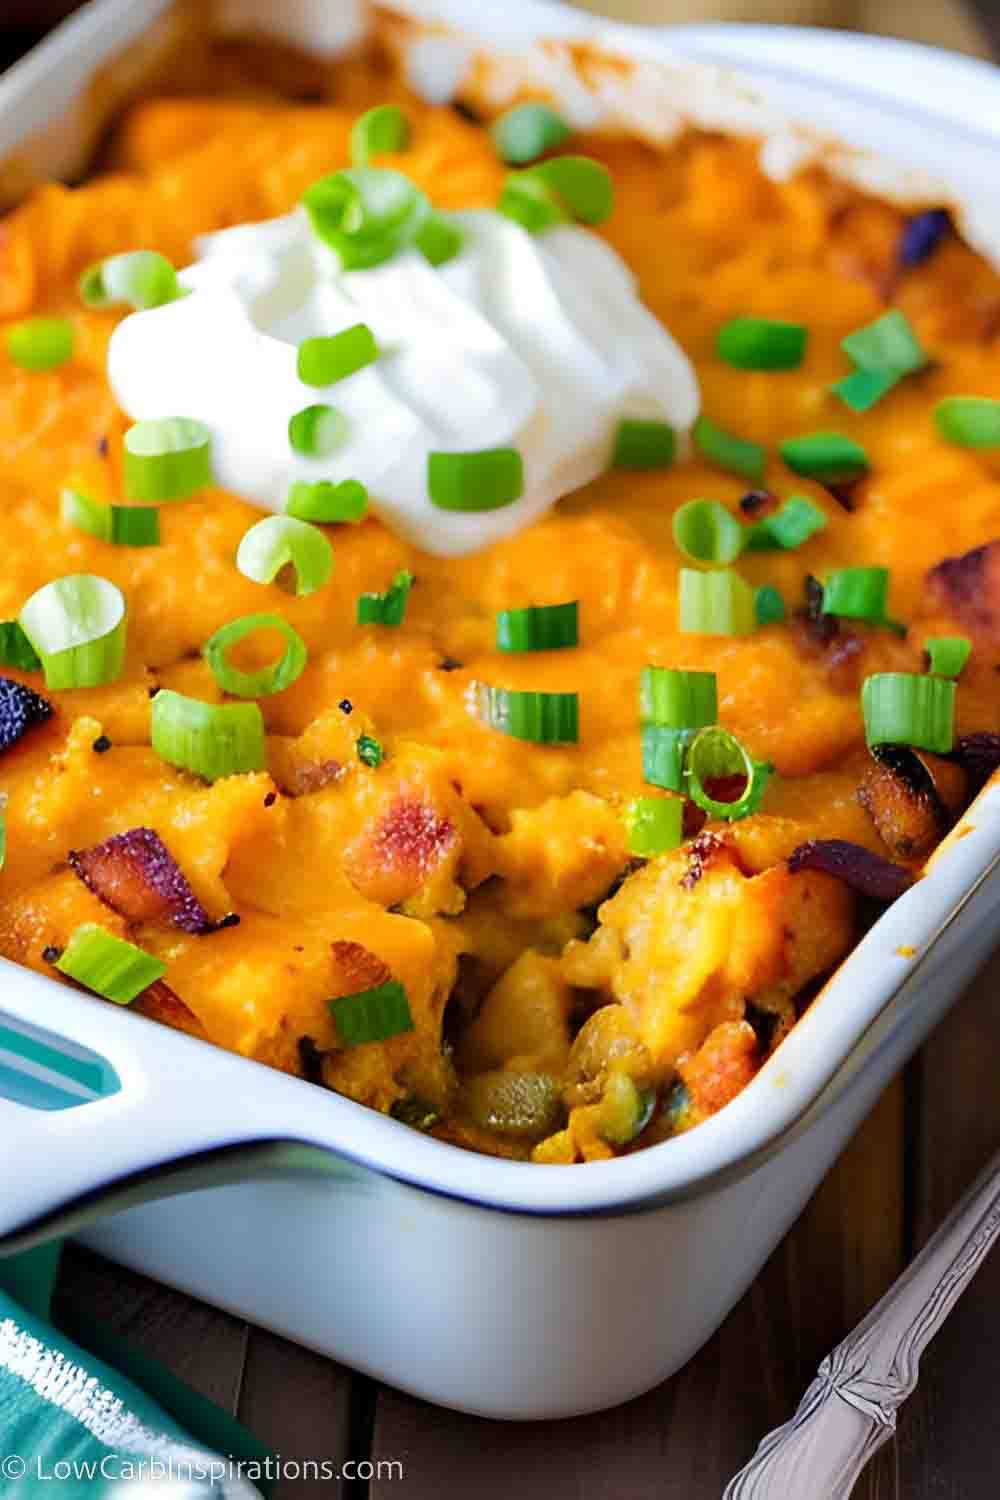 Easy Savory and Healthy Sweet Potato Casserole Recipe (low carb friendly)